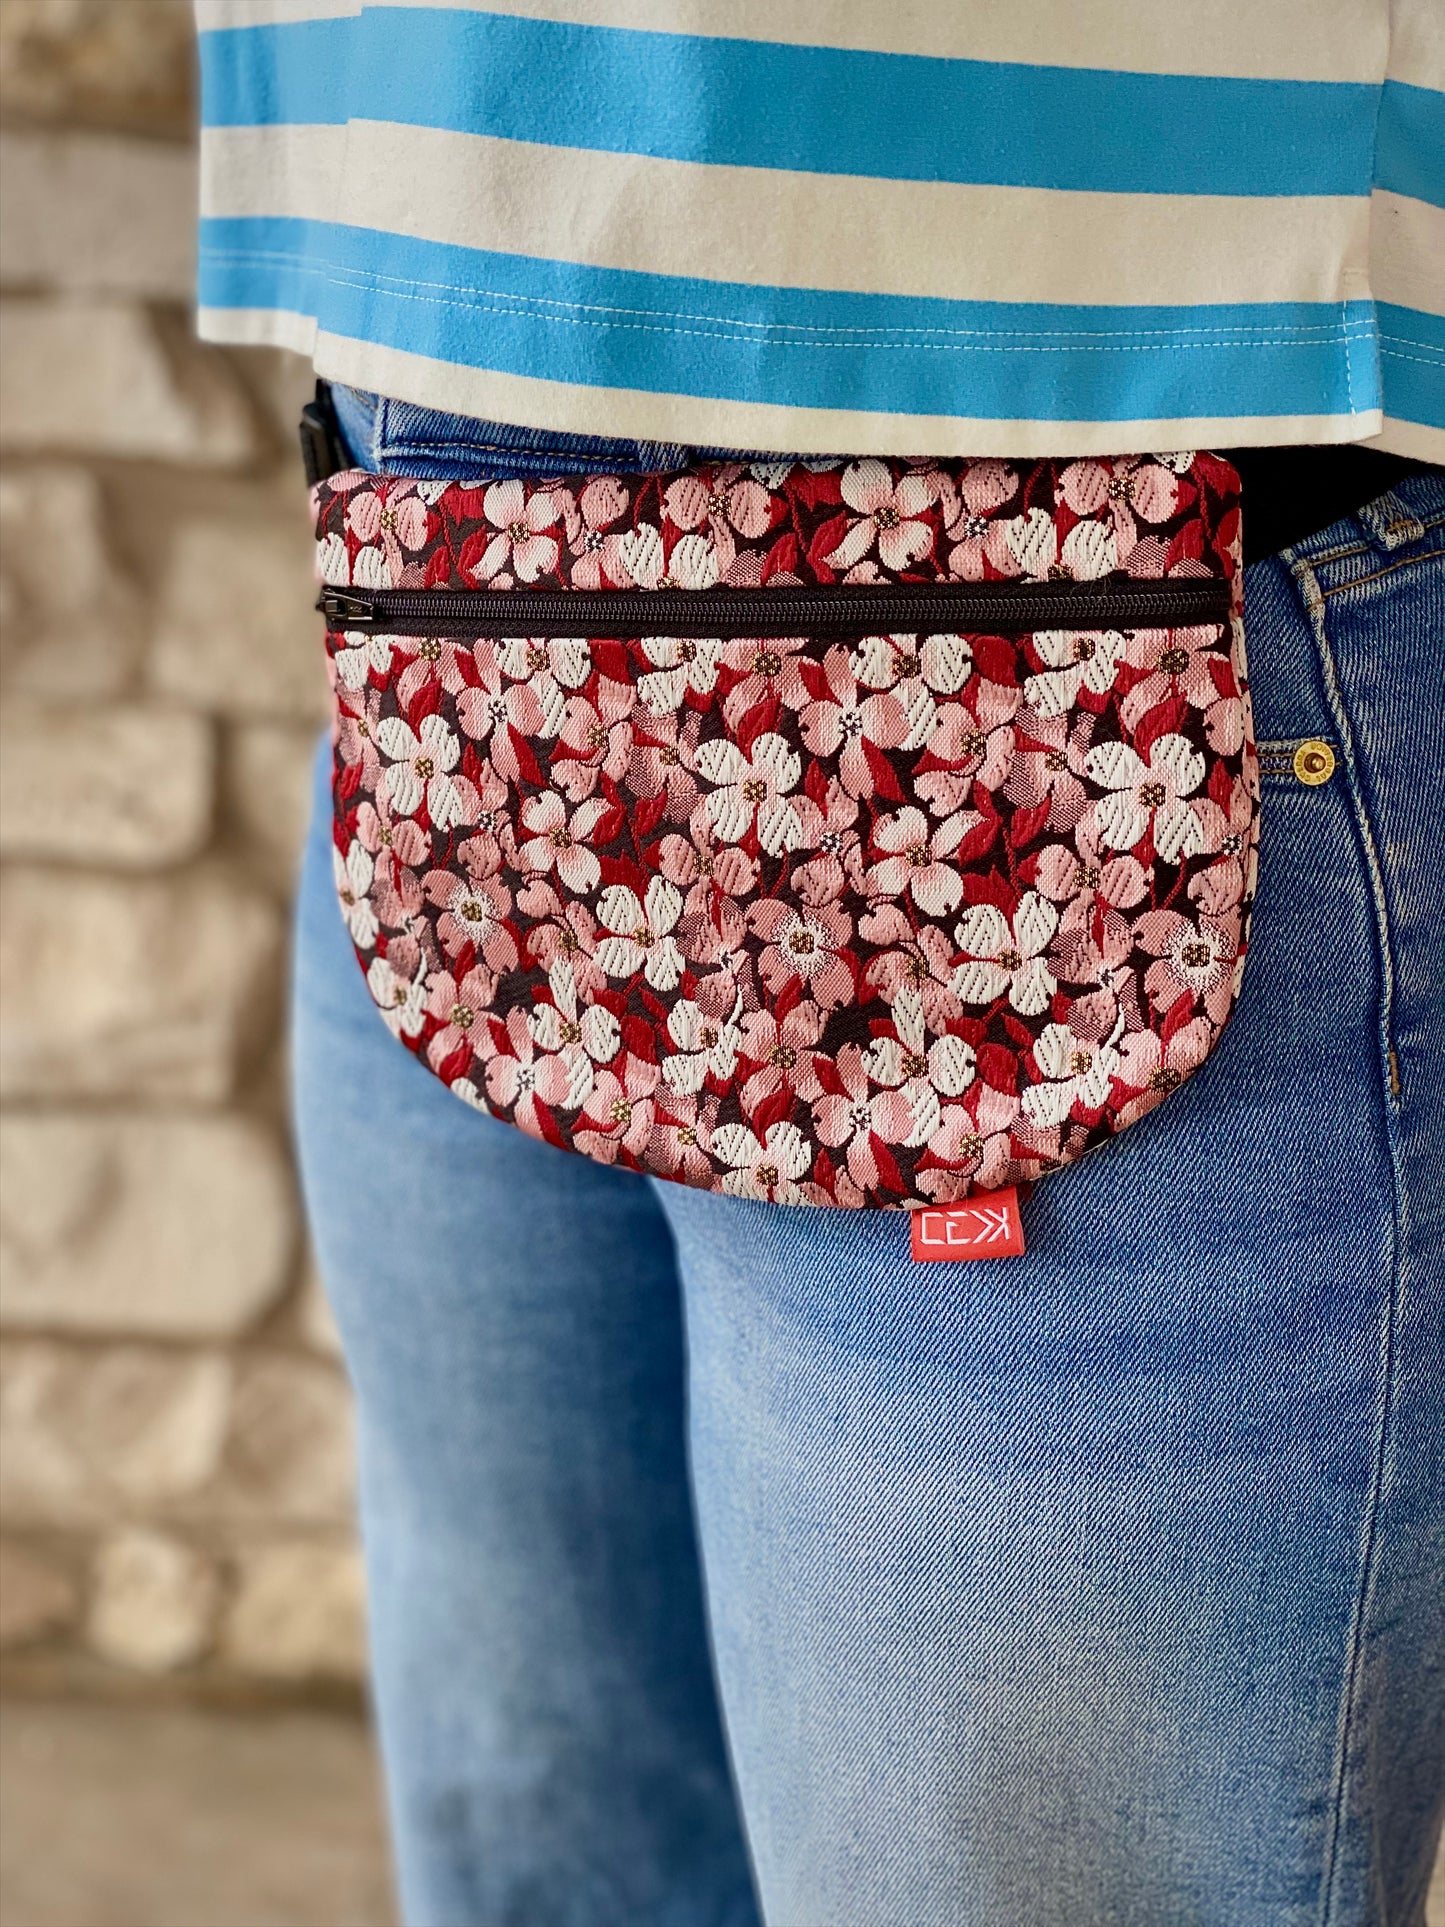 Kaiju Cut and Sew Floral Kimono Fanny Pack with built in 6 card slot wallet